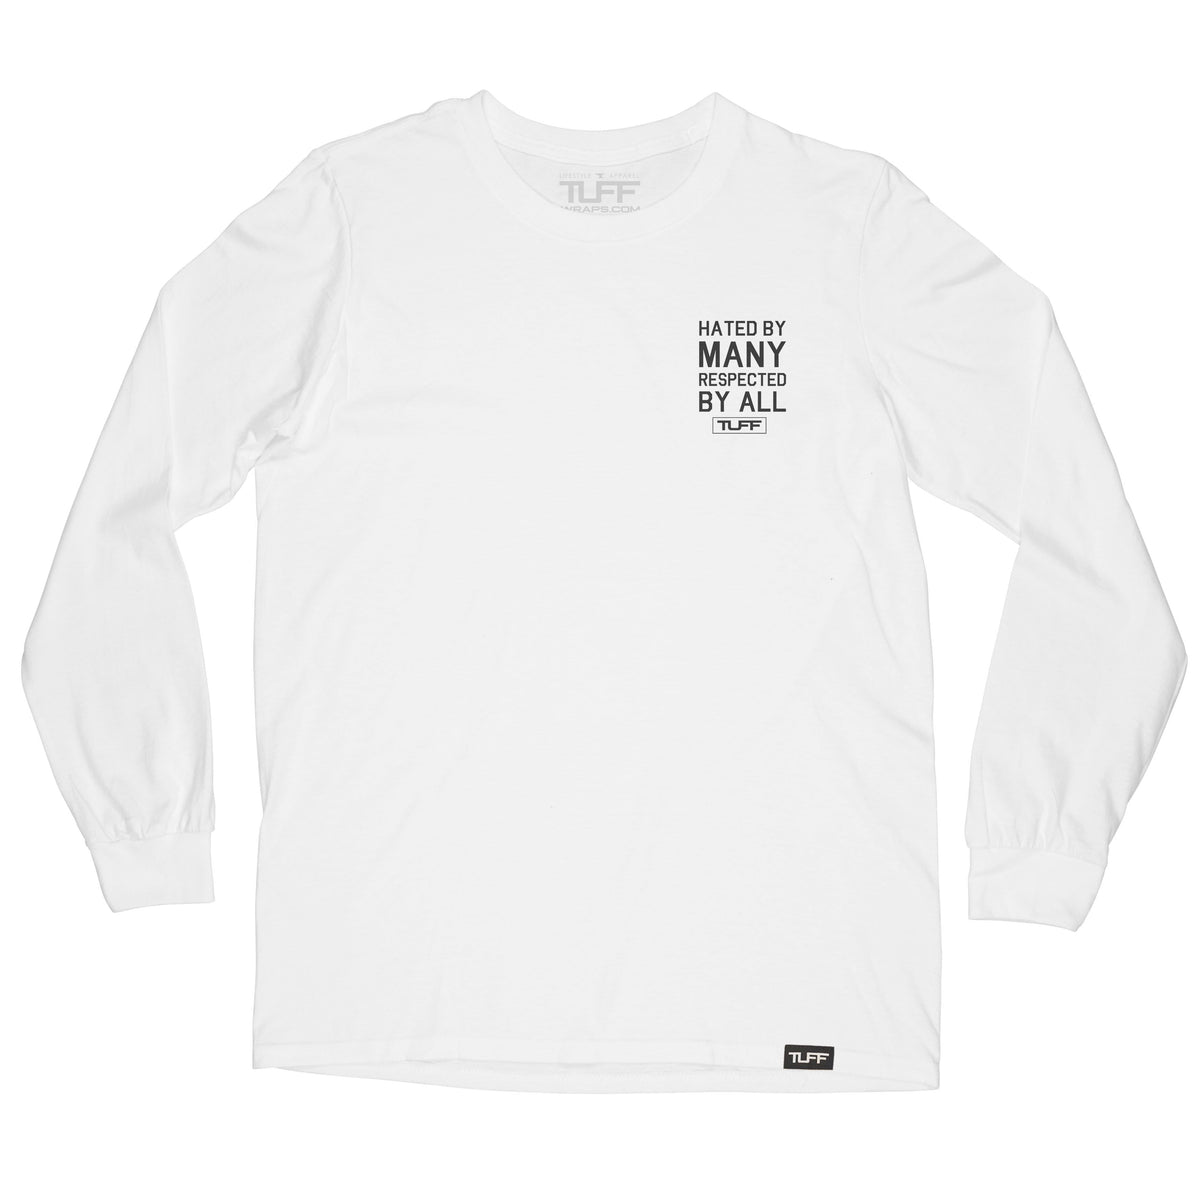 Hated By Many, Respected By All Long Sleeve Tee TuffWraps.com